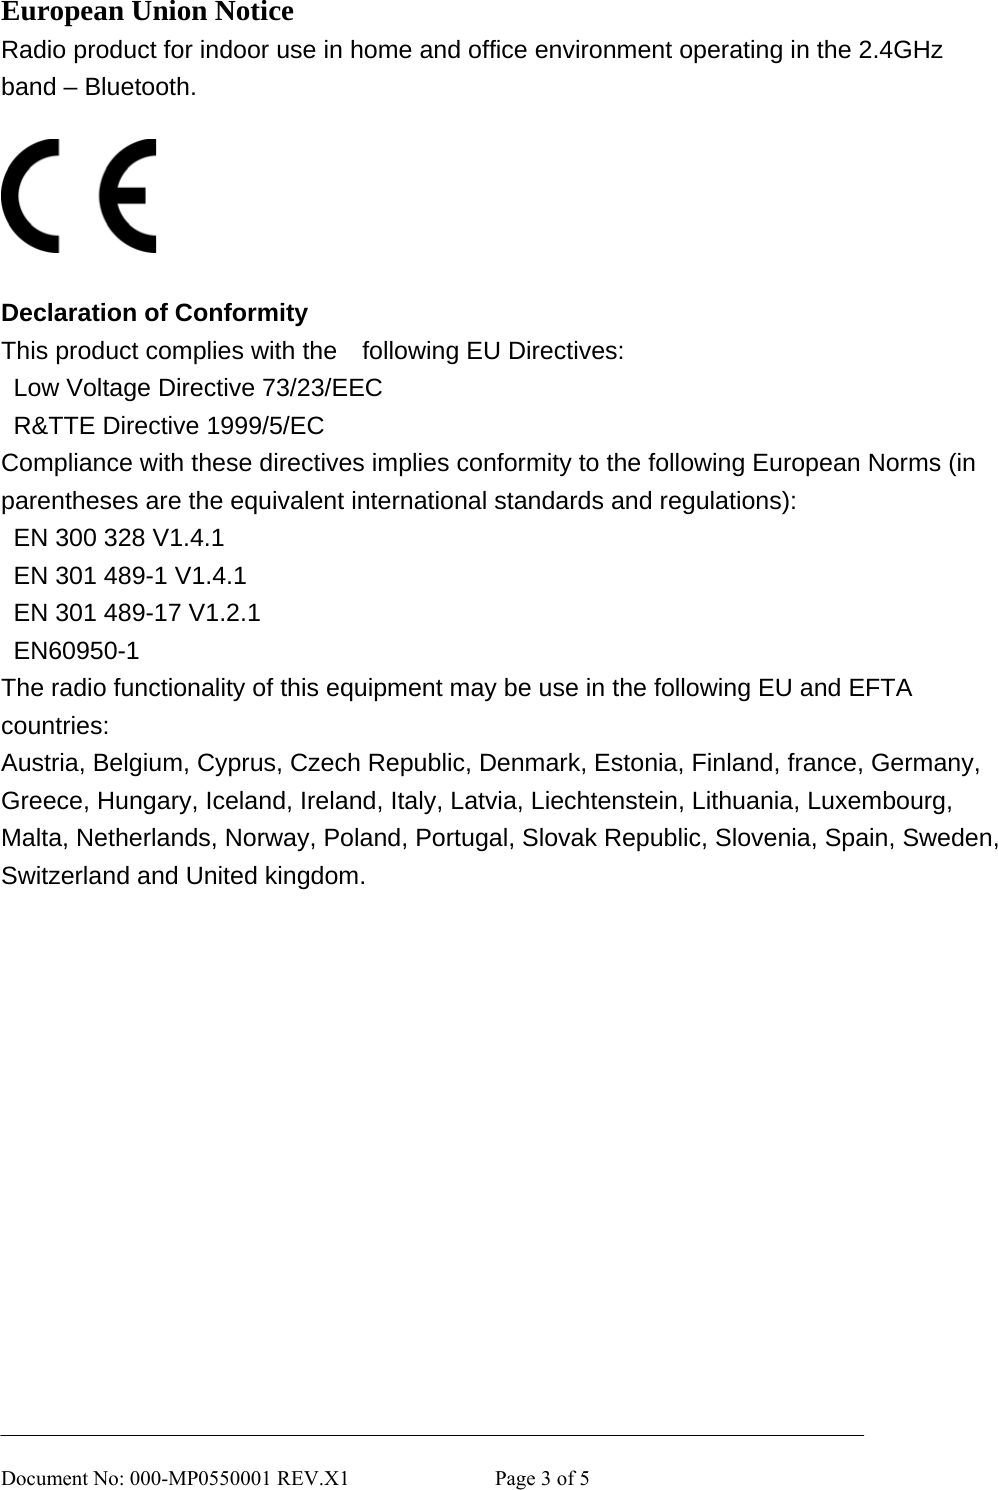       Document No: 000-MP0550001 REV.X1              Page 3 of 5 European Union Notice Radio product for indoor use in home and office environment operating in the 2.4GHz band – Bluetooth.    Declaration of Conformity This product complies with the    following EU Directives:   Low Voltage Directive 73/23/EEC   R&amp;TTE Directive 1999/5/EC Compliance with these directives implies conformity to the following European Norms (in parentheses are the equivalent international standards and regulations):   EN 300 328 V1.4.1   EN 301 489-1 V1.4.1   EN 301 489-17 V1.2.1  EN60950-1 The radio functionality of this equipment may be use in the following EU and EFTA countries: Austria, Belgium, Cyprus, Czech Republic, Denmark, Estonia, Finland, france, Germany, Greece, Hungary, Iceland, Ireland, Italy, Latvia, Liechtenstein, Lithuania, Luxembourg, Malta, Netherlands, Norway, Poland, Portugal, Slovak Republic, Slovenia, Spain, Sweden, Switzerland and United kingdom.   